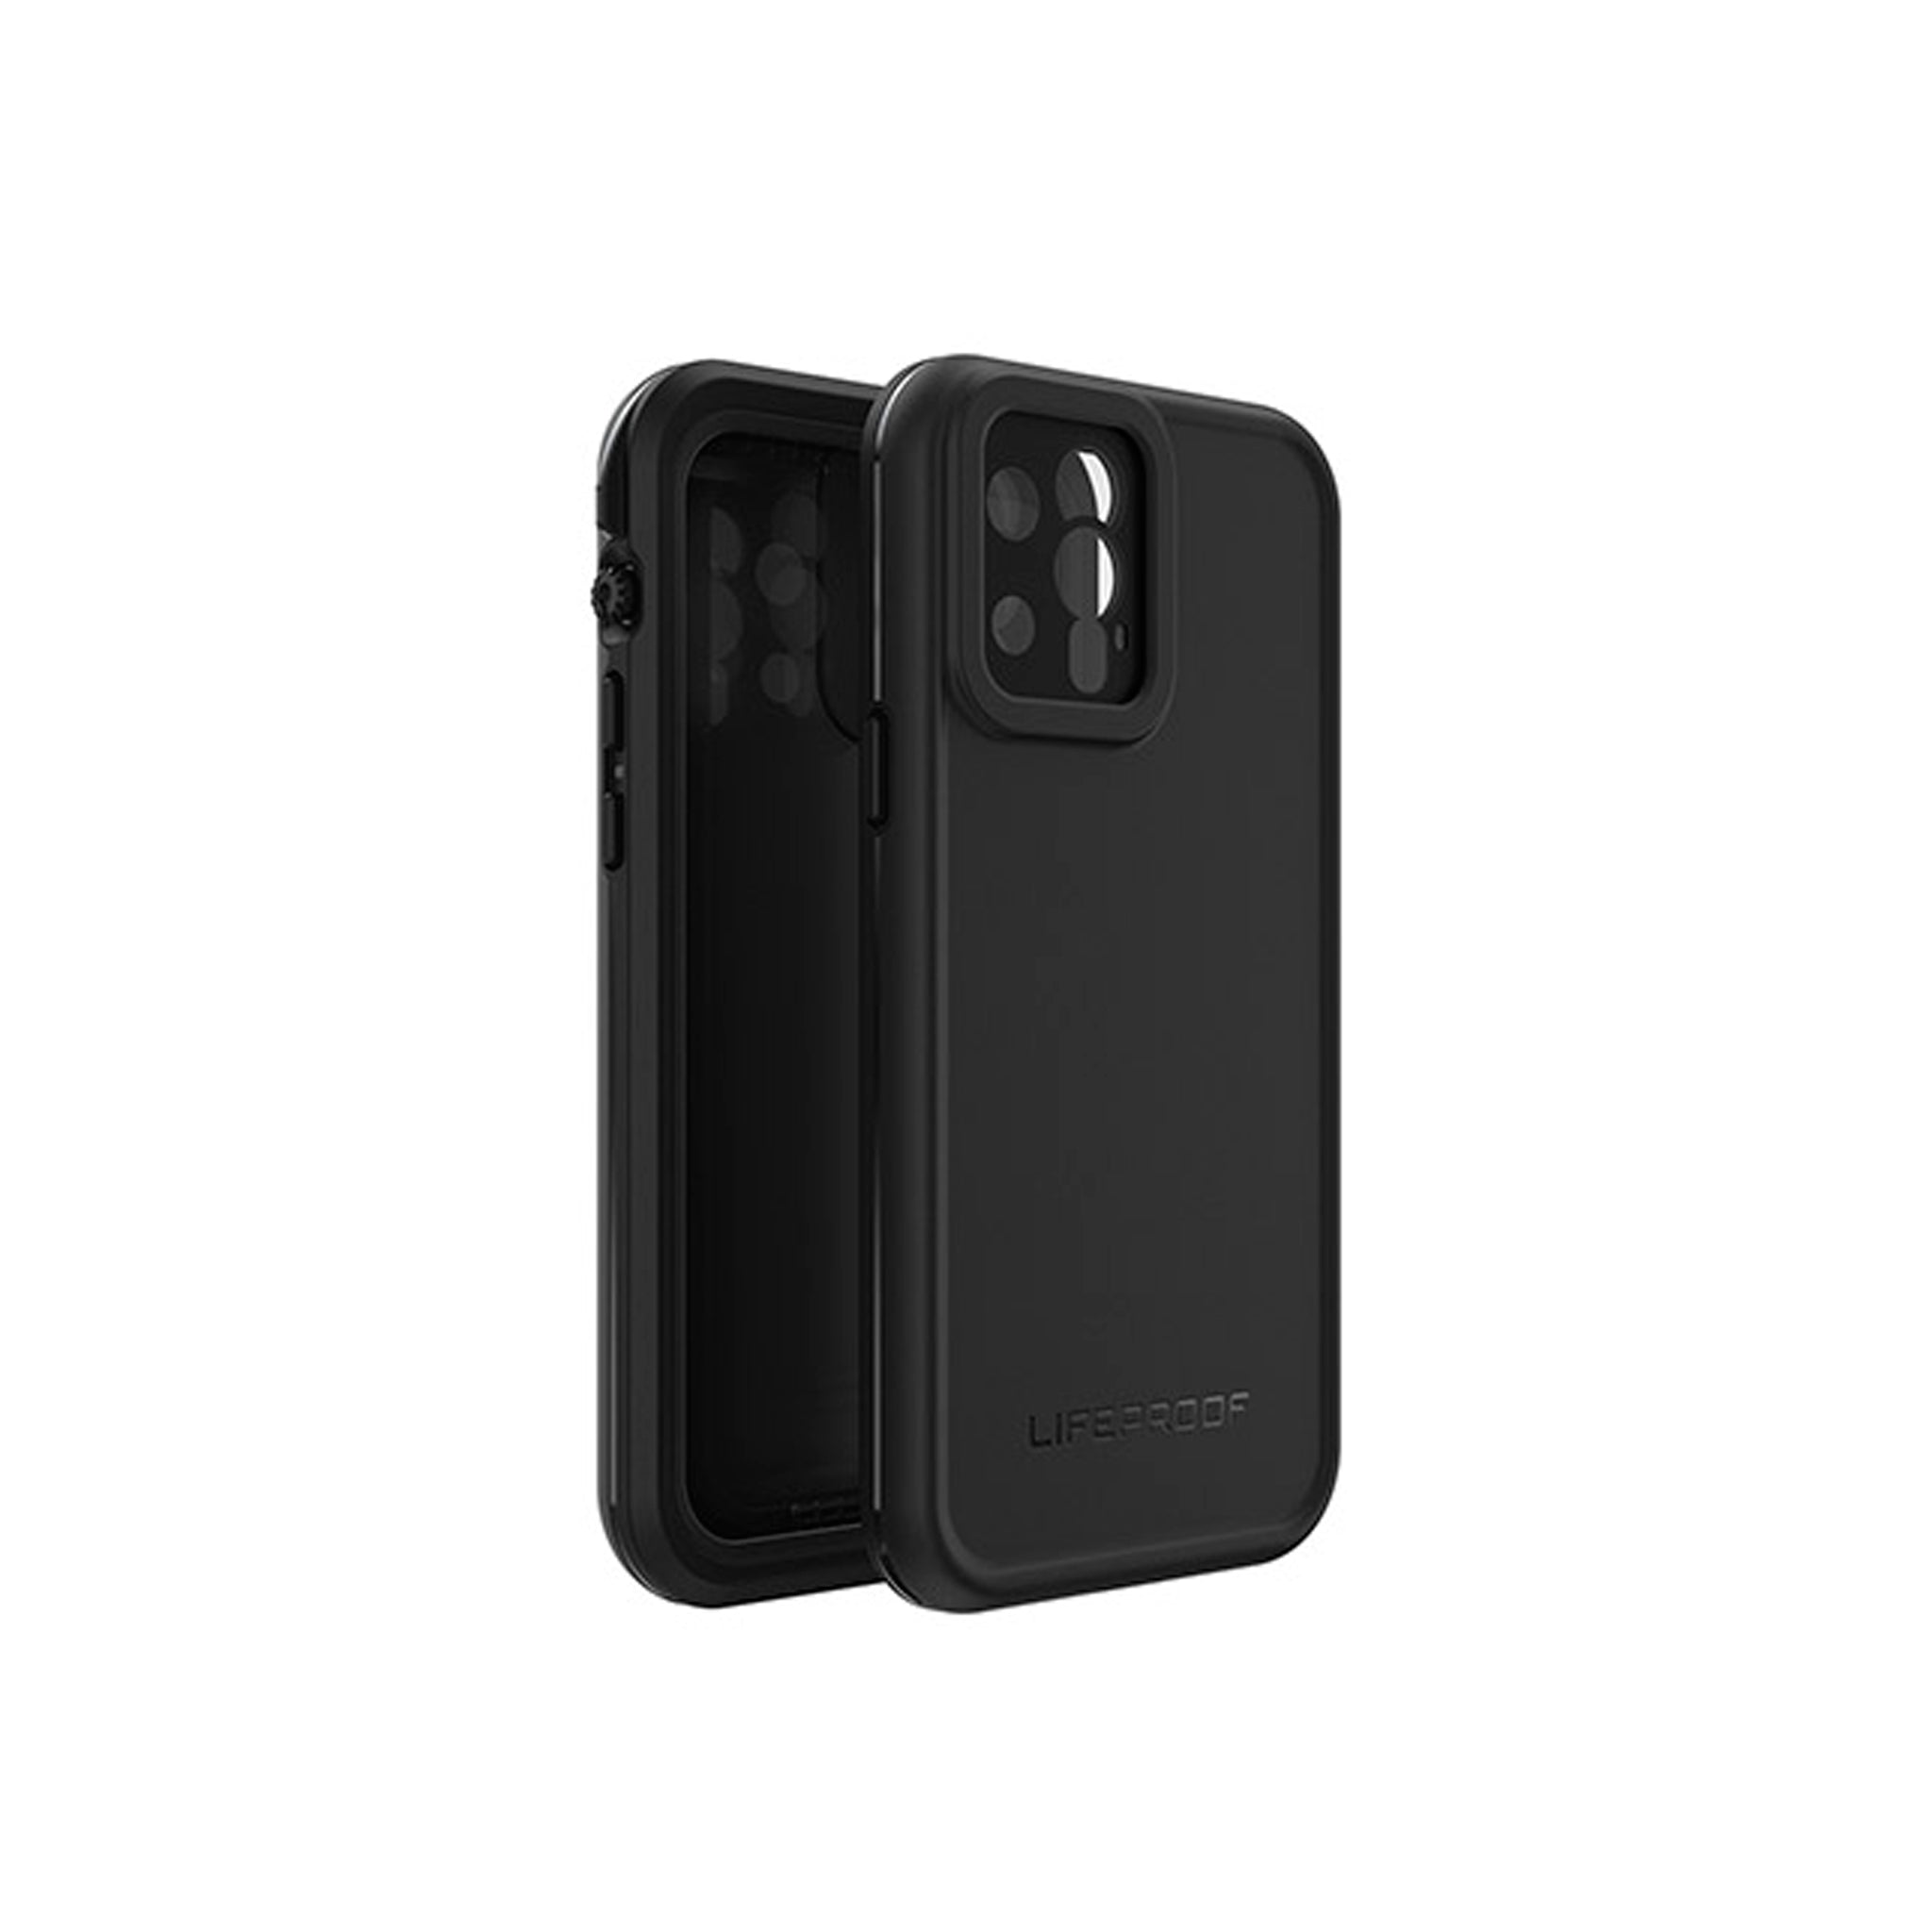 LifeProof - Fre for iPhone 12 Pro - Black